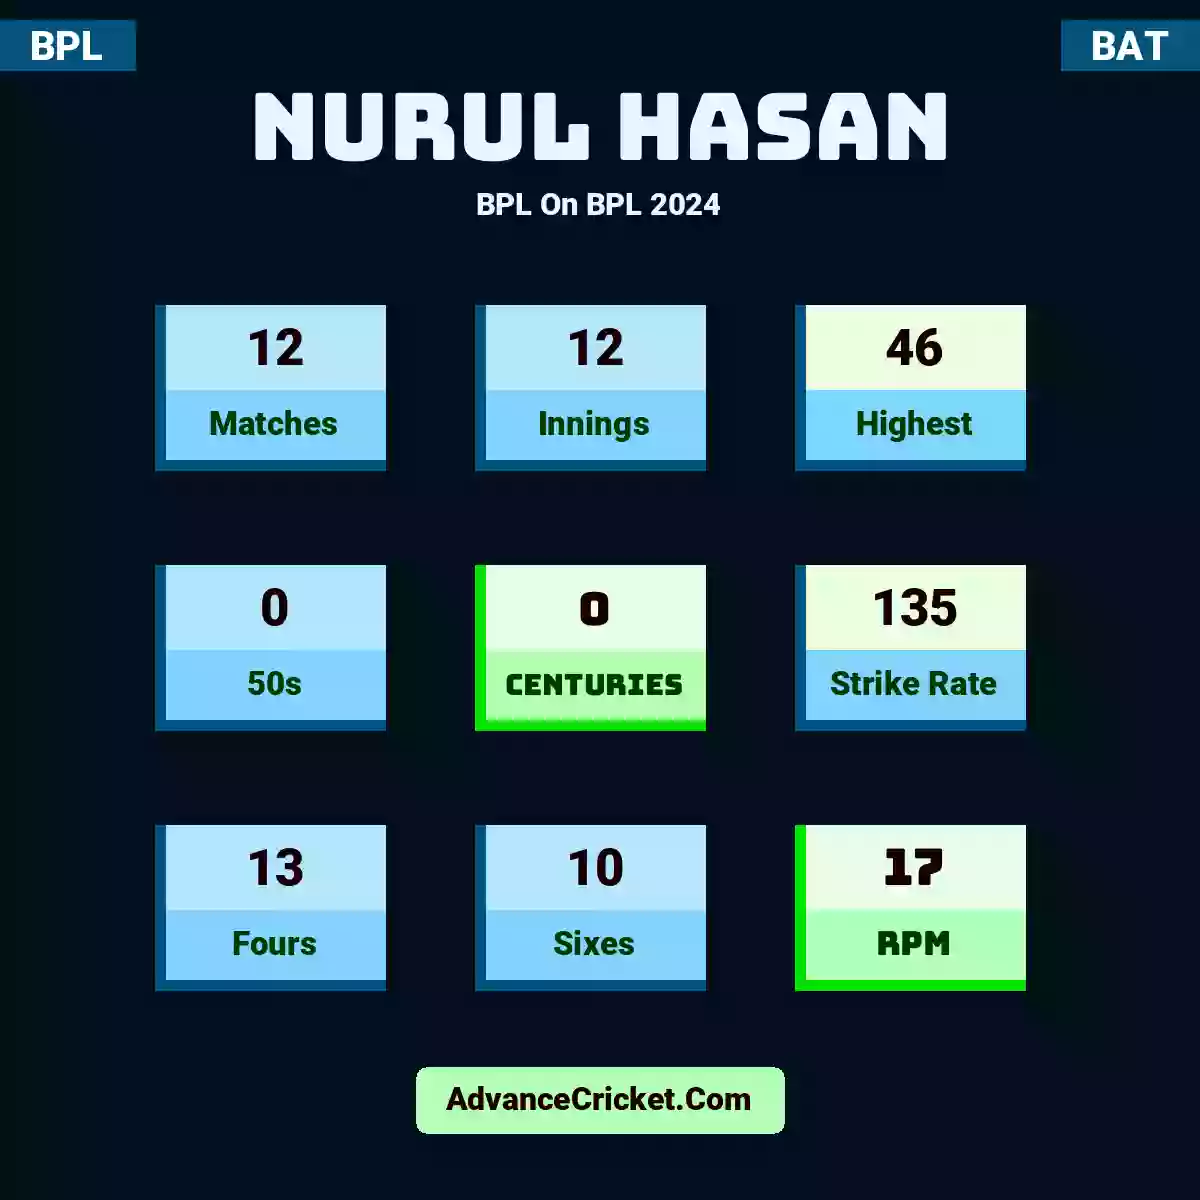 Nurul Hasan BPL  On BPL 2024, Nurul Hasan played 12 matches, scored 46 runs as highest, 0 half-centuries, and 0 centuries, with a strike rate of 135. N.Hasan hit 13 fours and 10 sixes, with an RPM of 17.